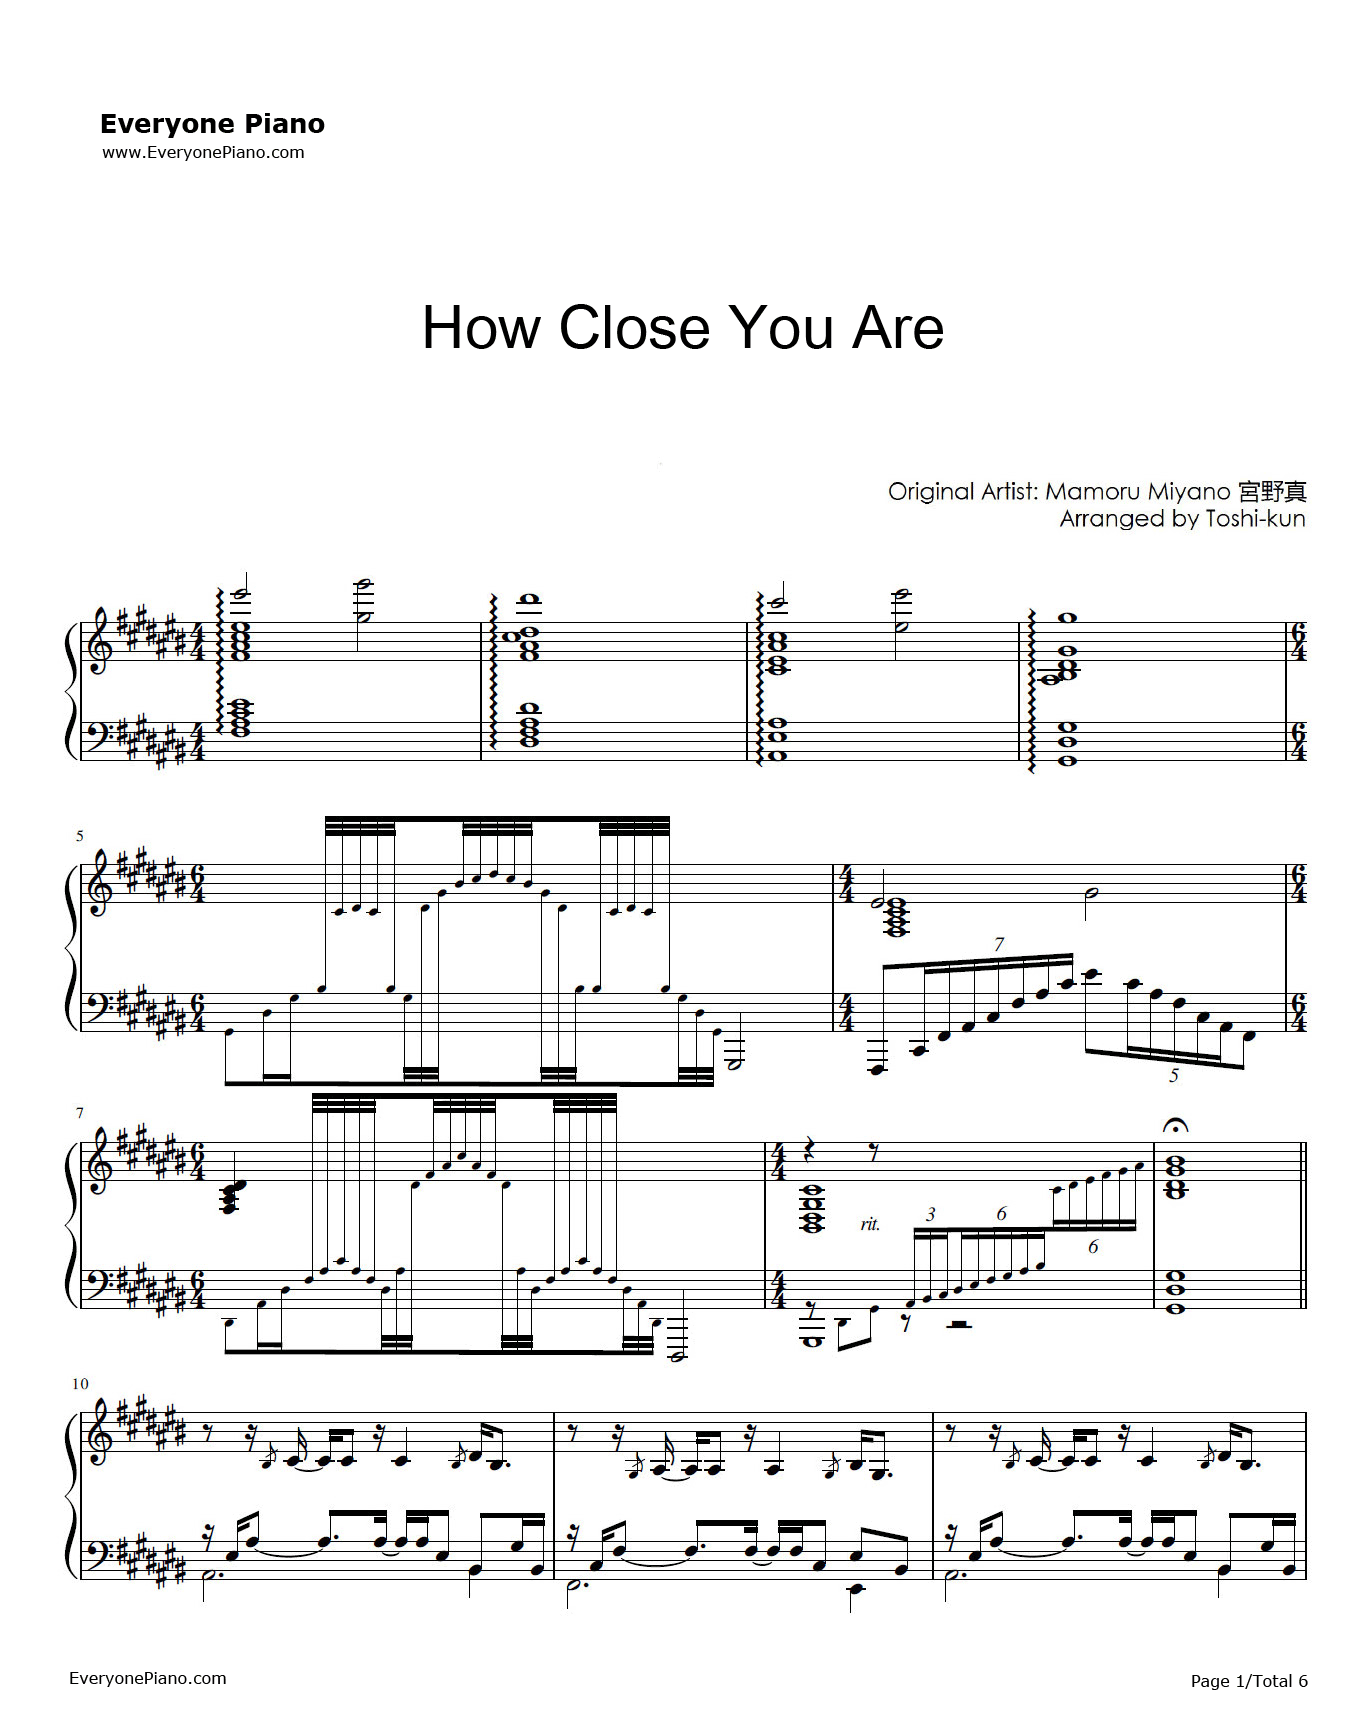 How_Close_You_Are钢琴谱_宫野真守